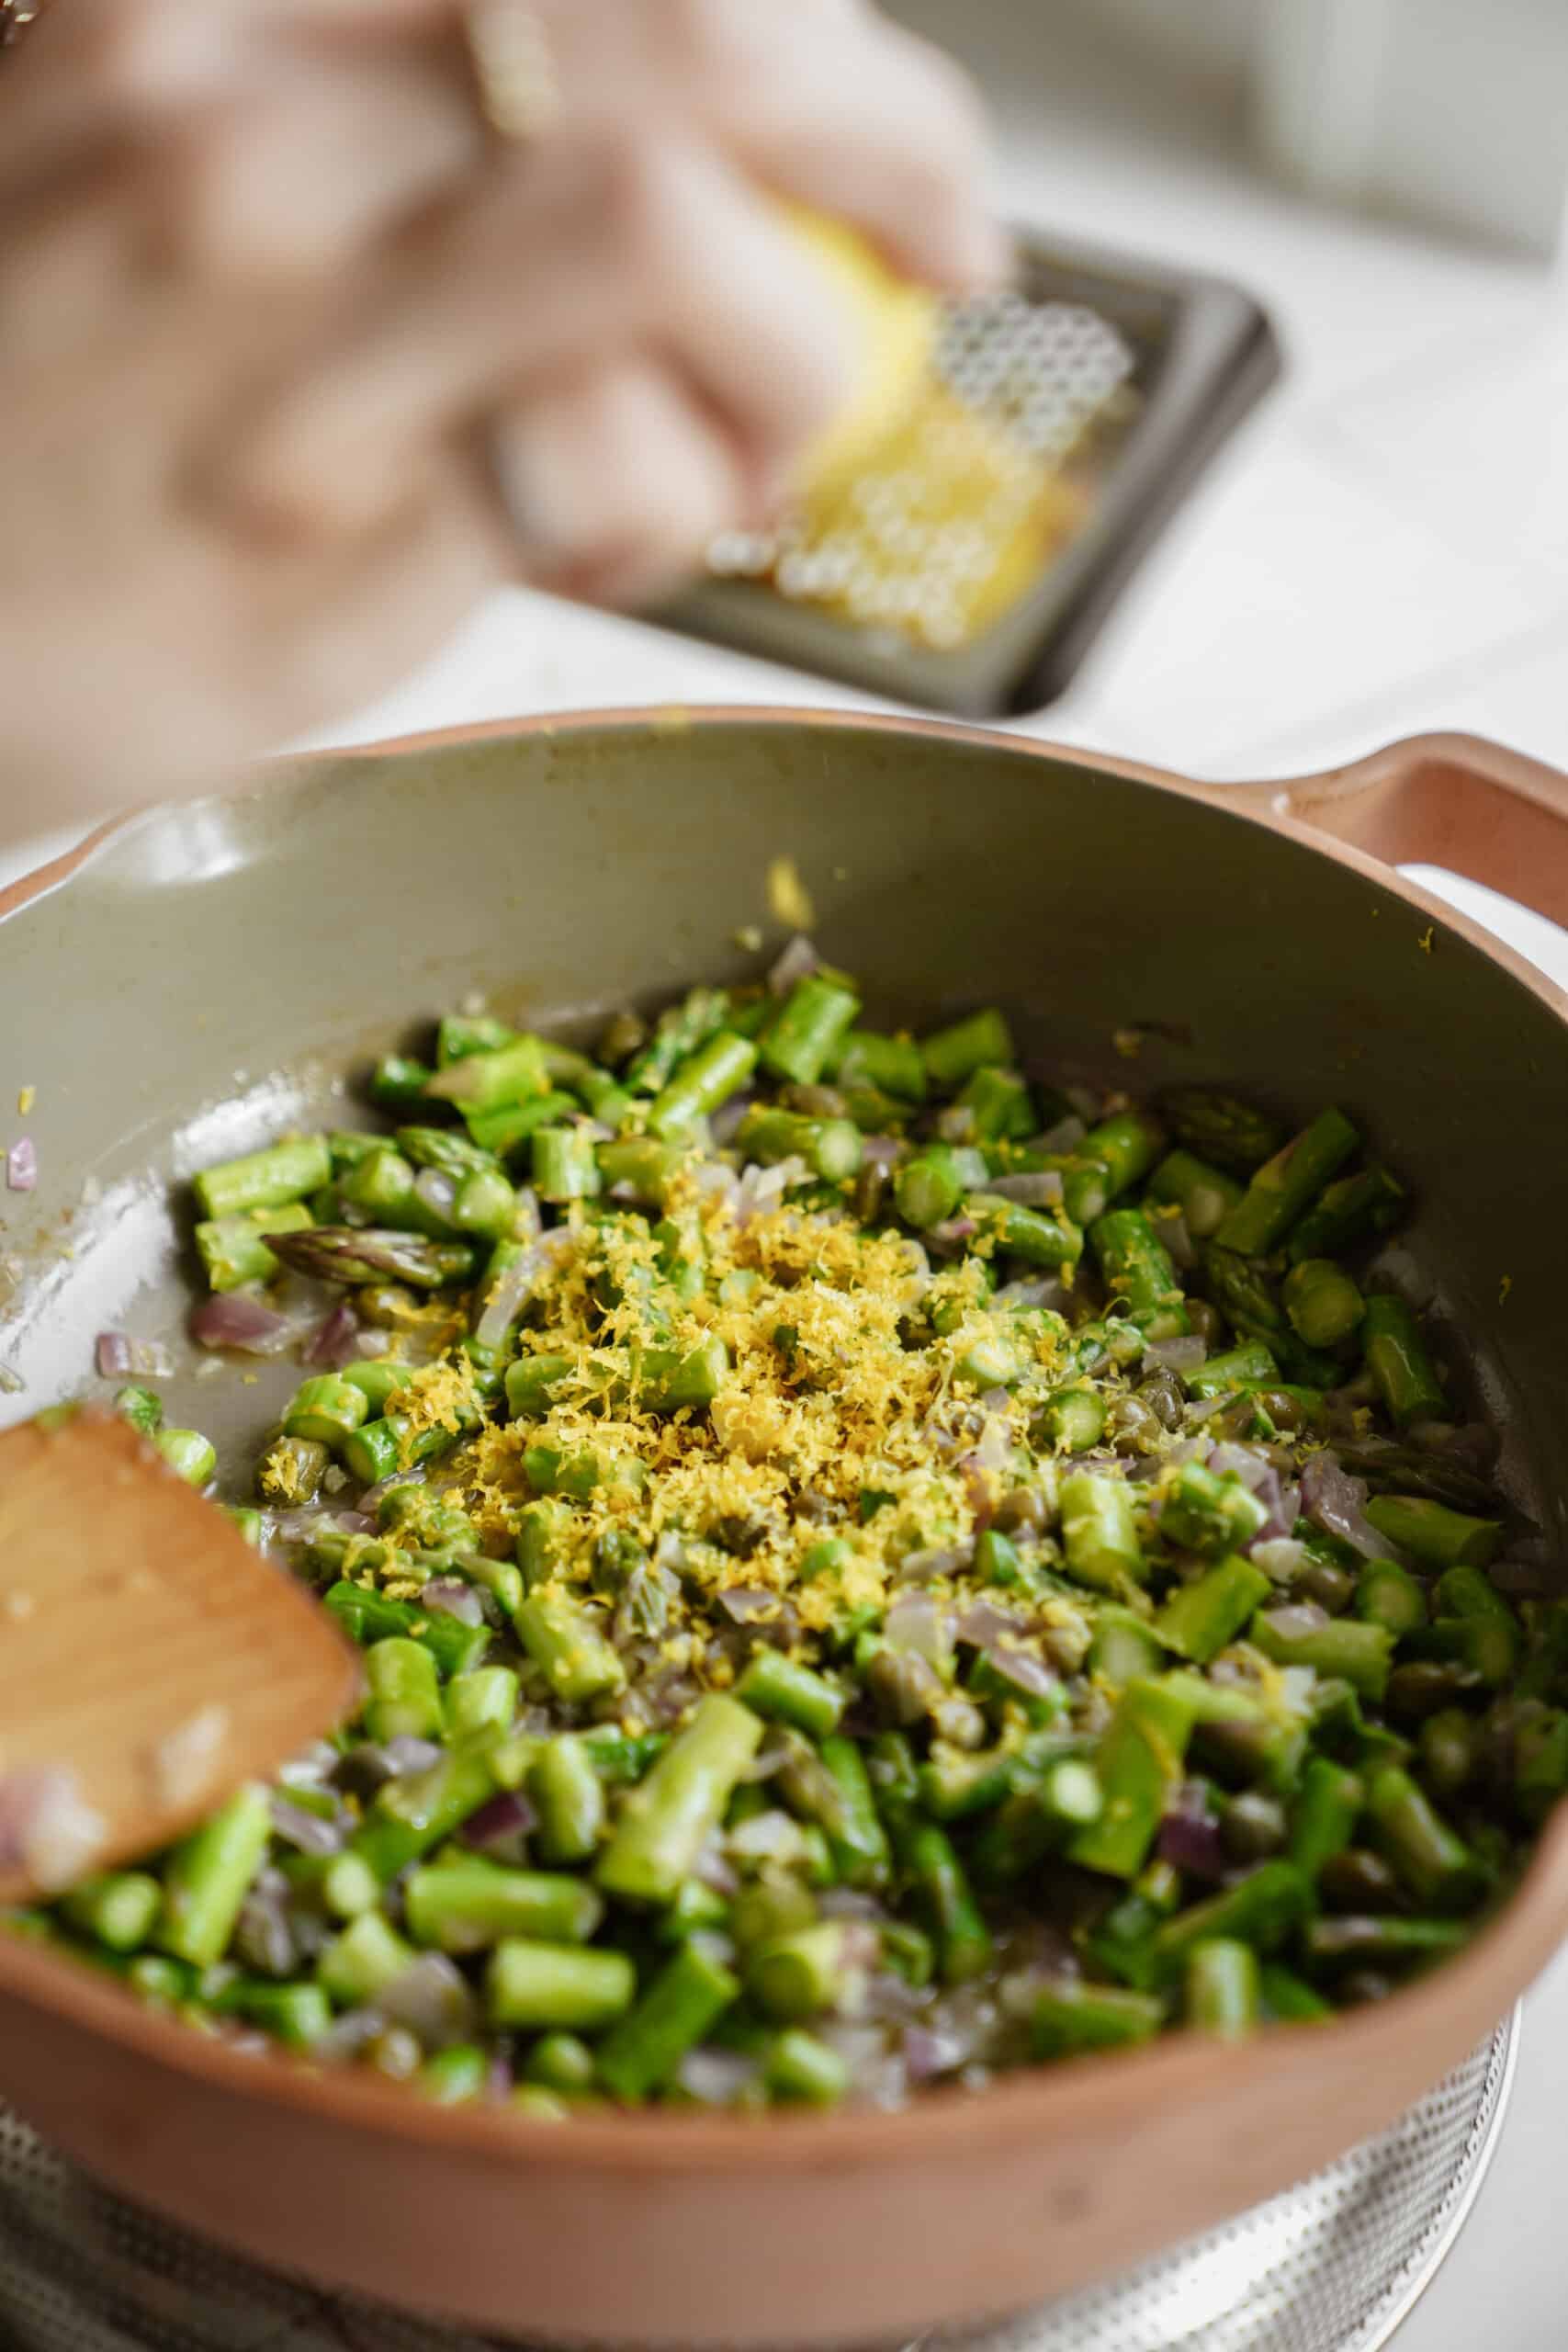 Asparagus being cooked in a pan with lemon zest being added